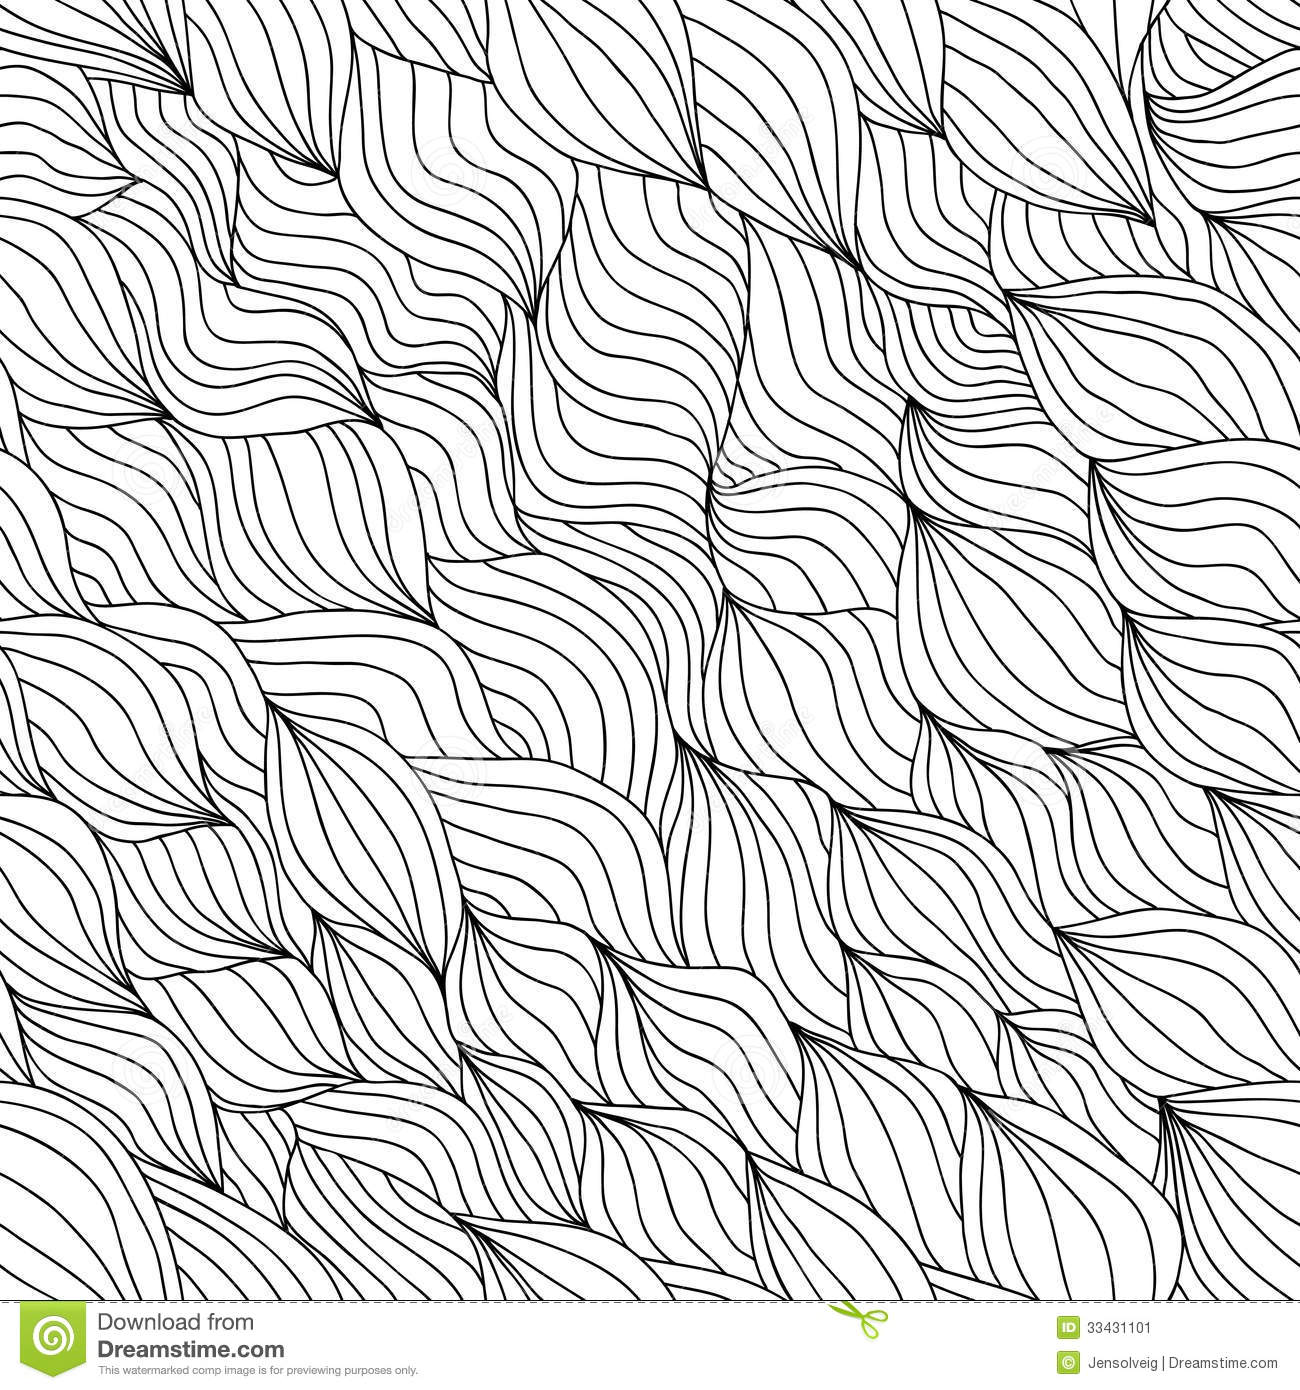 Black and White Patterns to Draw